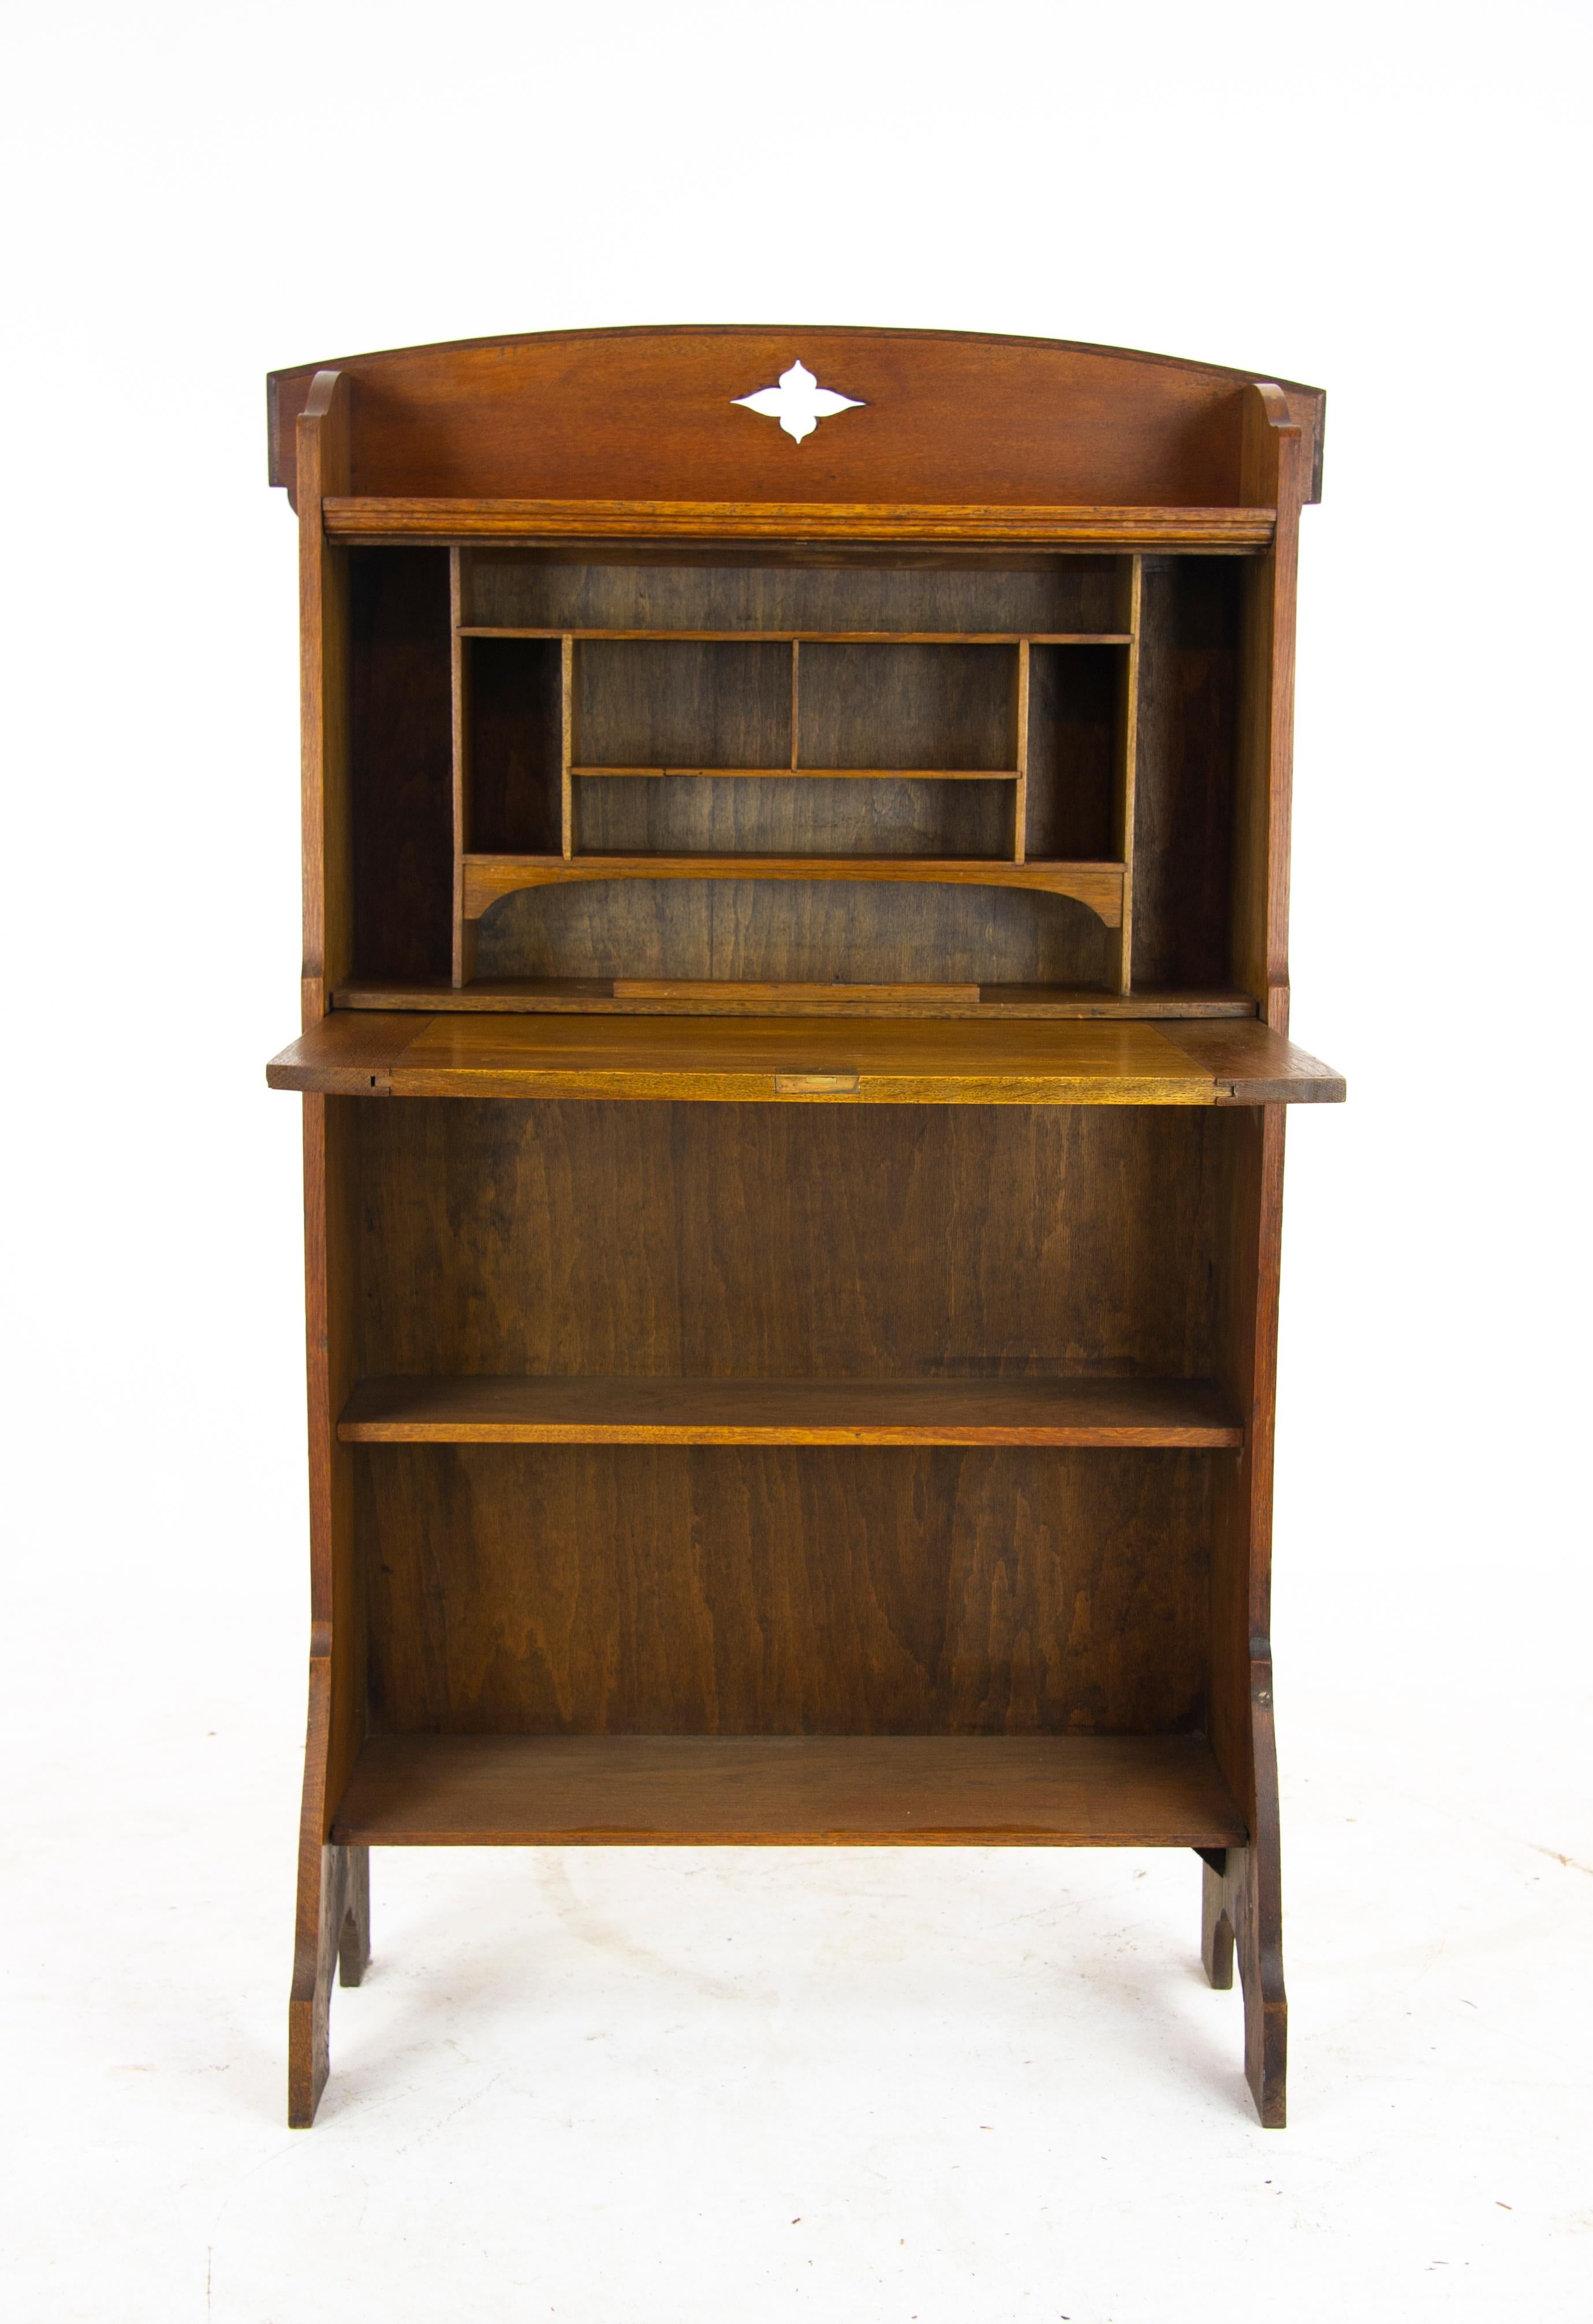 Arts & Crafts bookcase, oak bookcase, Glasgow, Scotland 1910, Antique Furniture

Scotland, 1910
Shaped gallery to the top with pierced diamond
Slanted drop front opens to reveal
Shelved interior with a flat work surface
Two fixed shelves